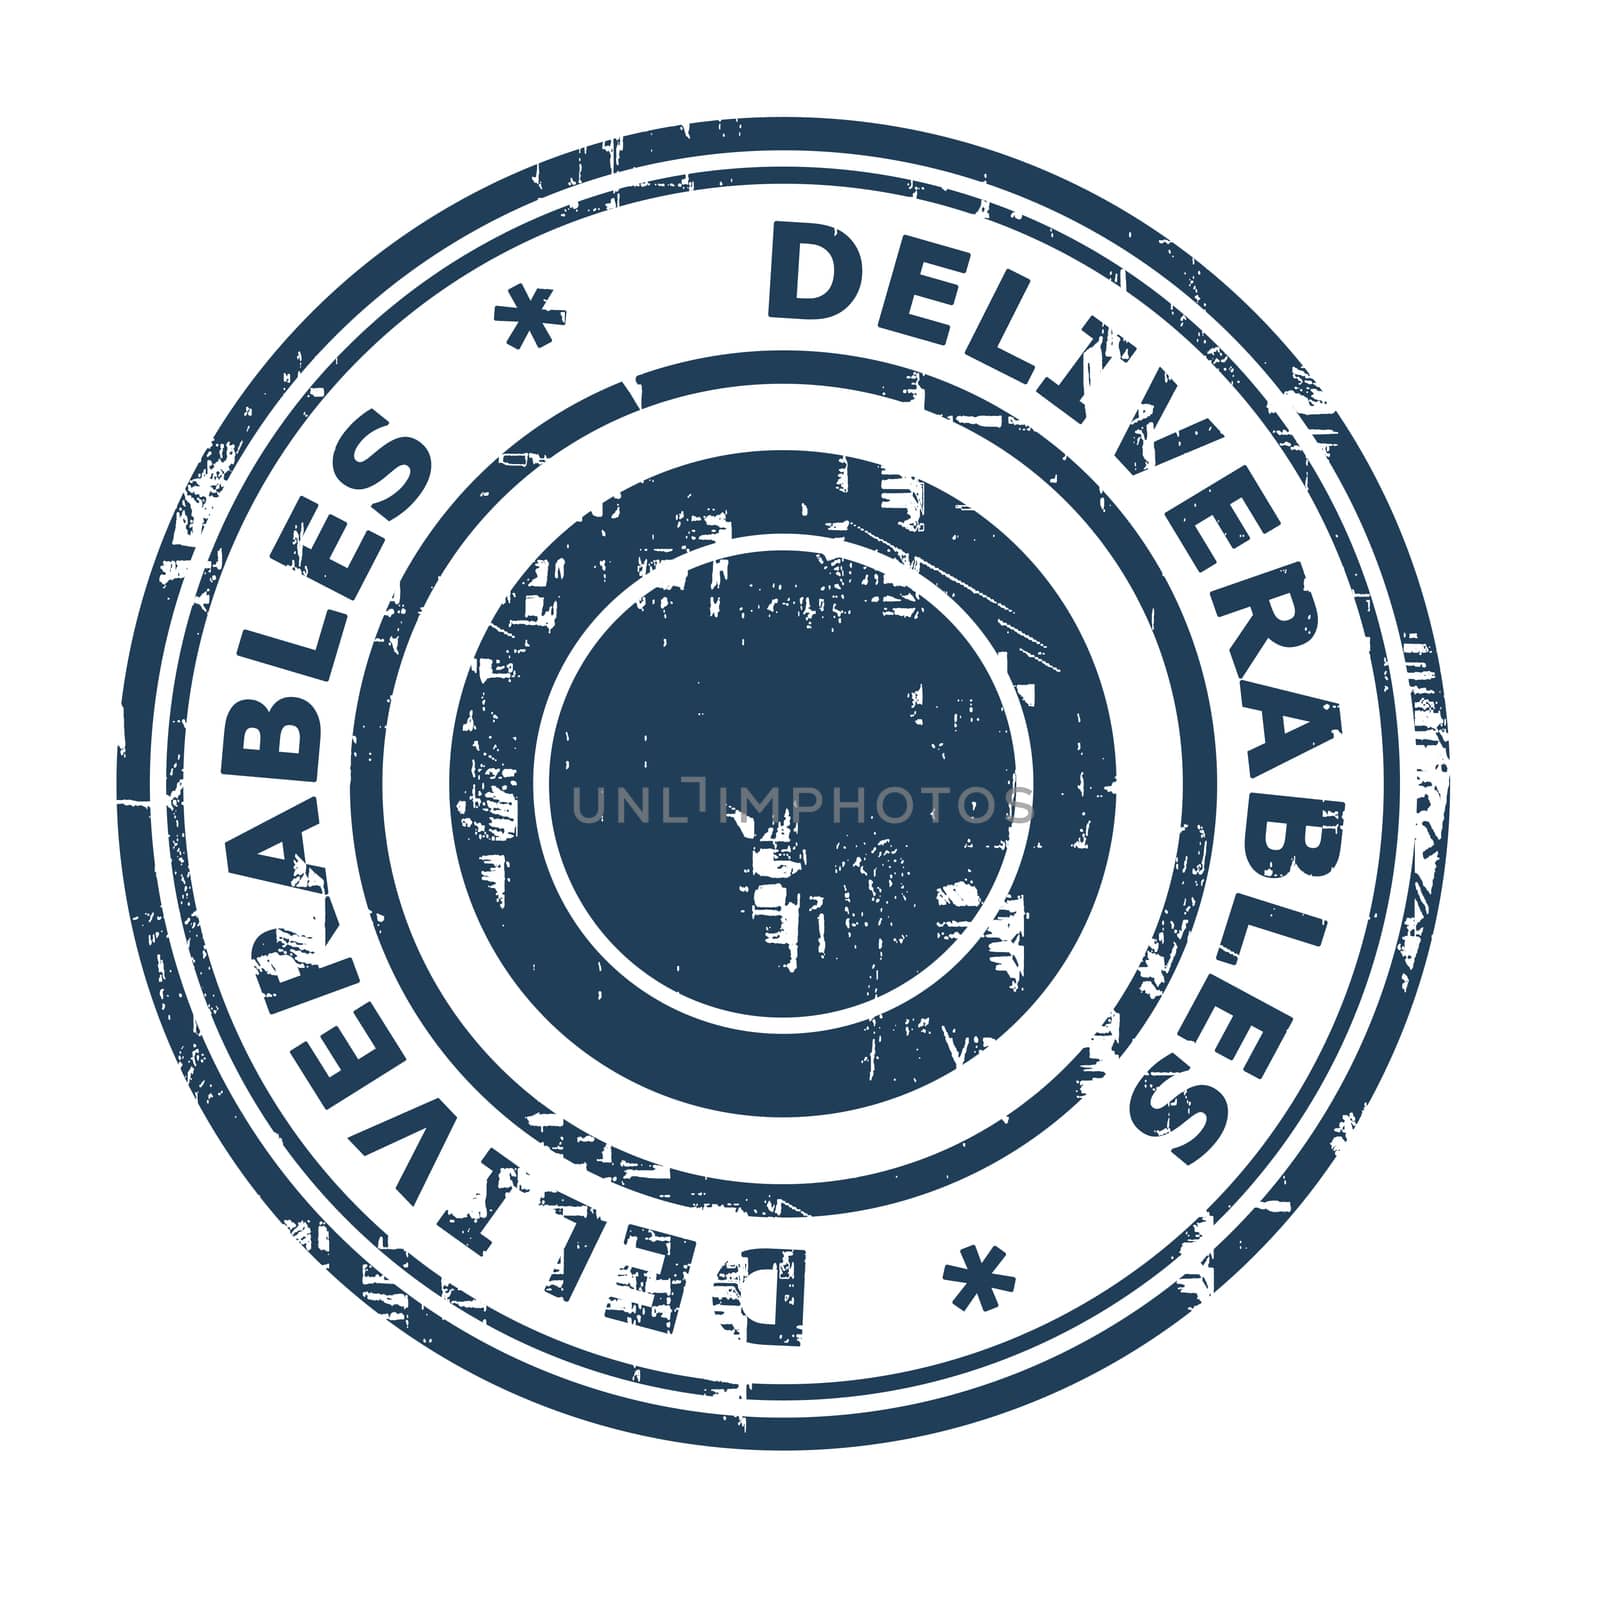 Deliverables business concept rubber stamp by speedfighter